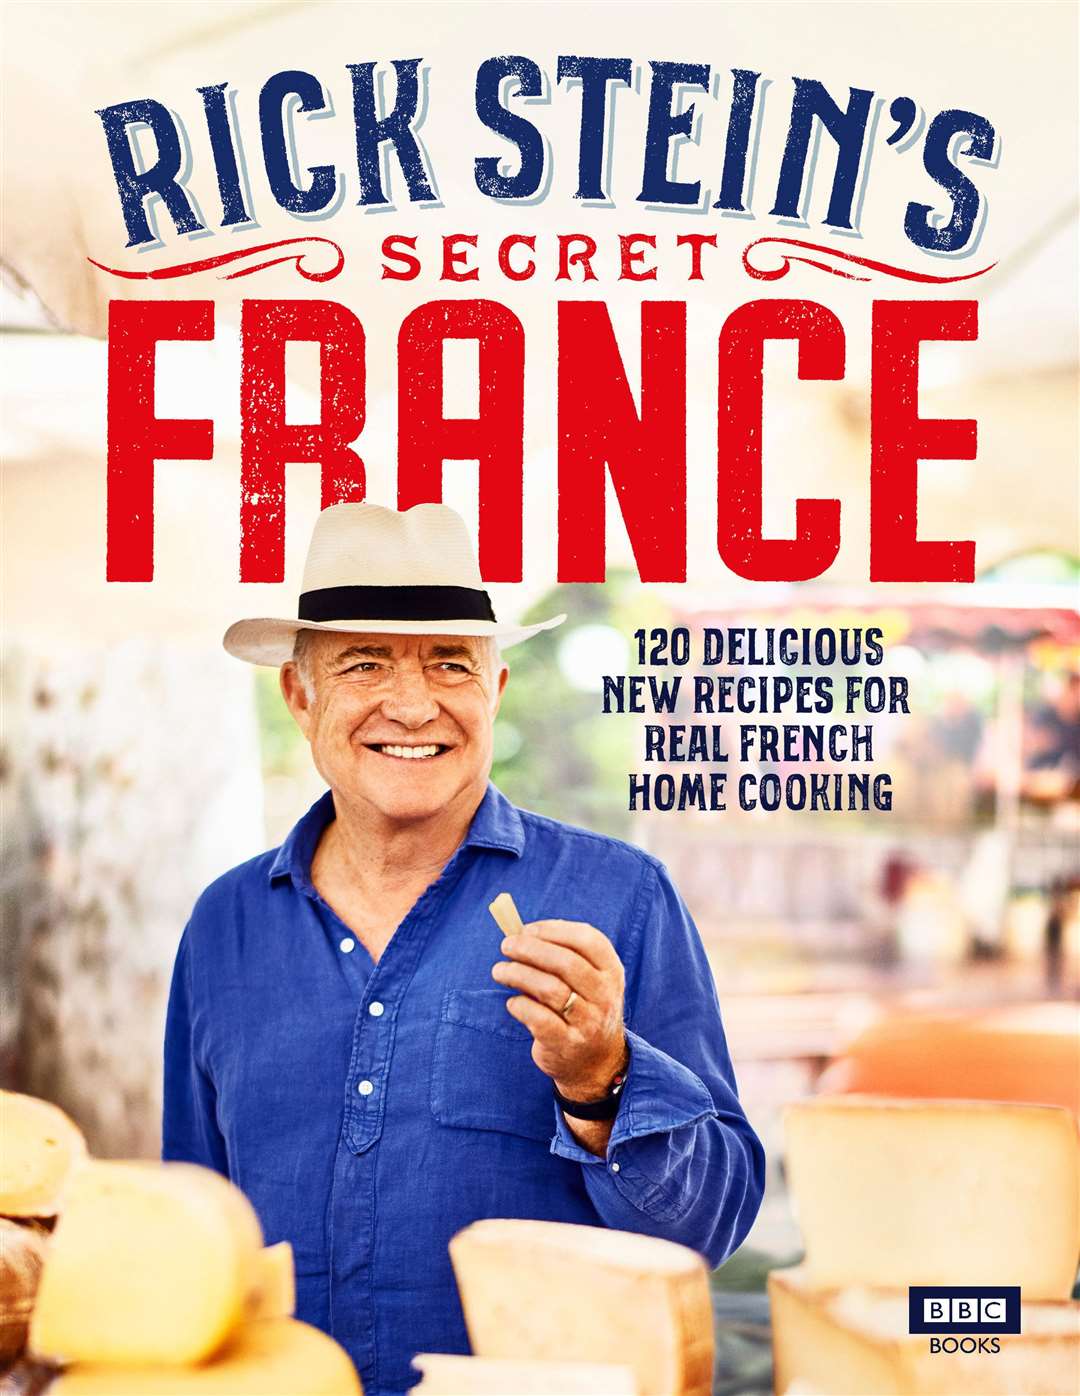 Rick Stein's Secret France by Rick Stein (BBC Books, £26). Picture: PA Photo/James Murphy